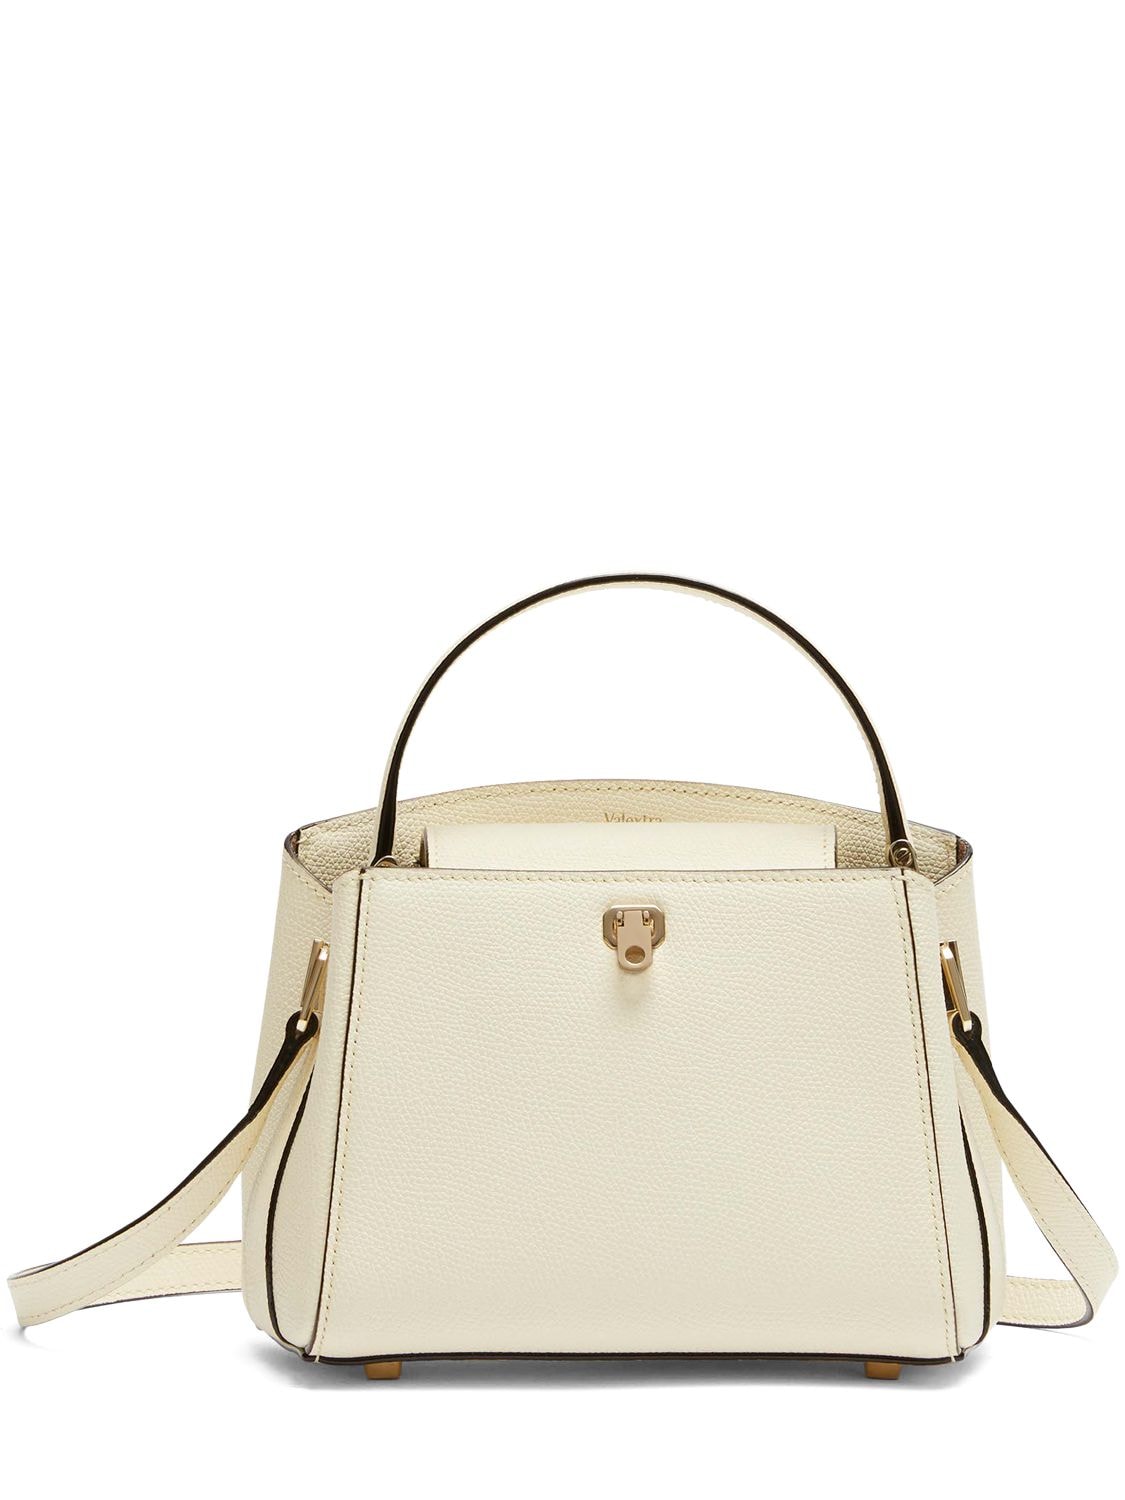 Image of Brera Micro Soft Grained Leather Bag